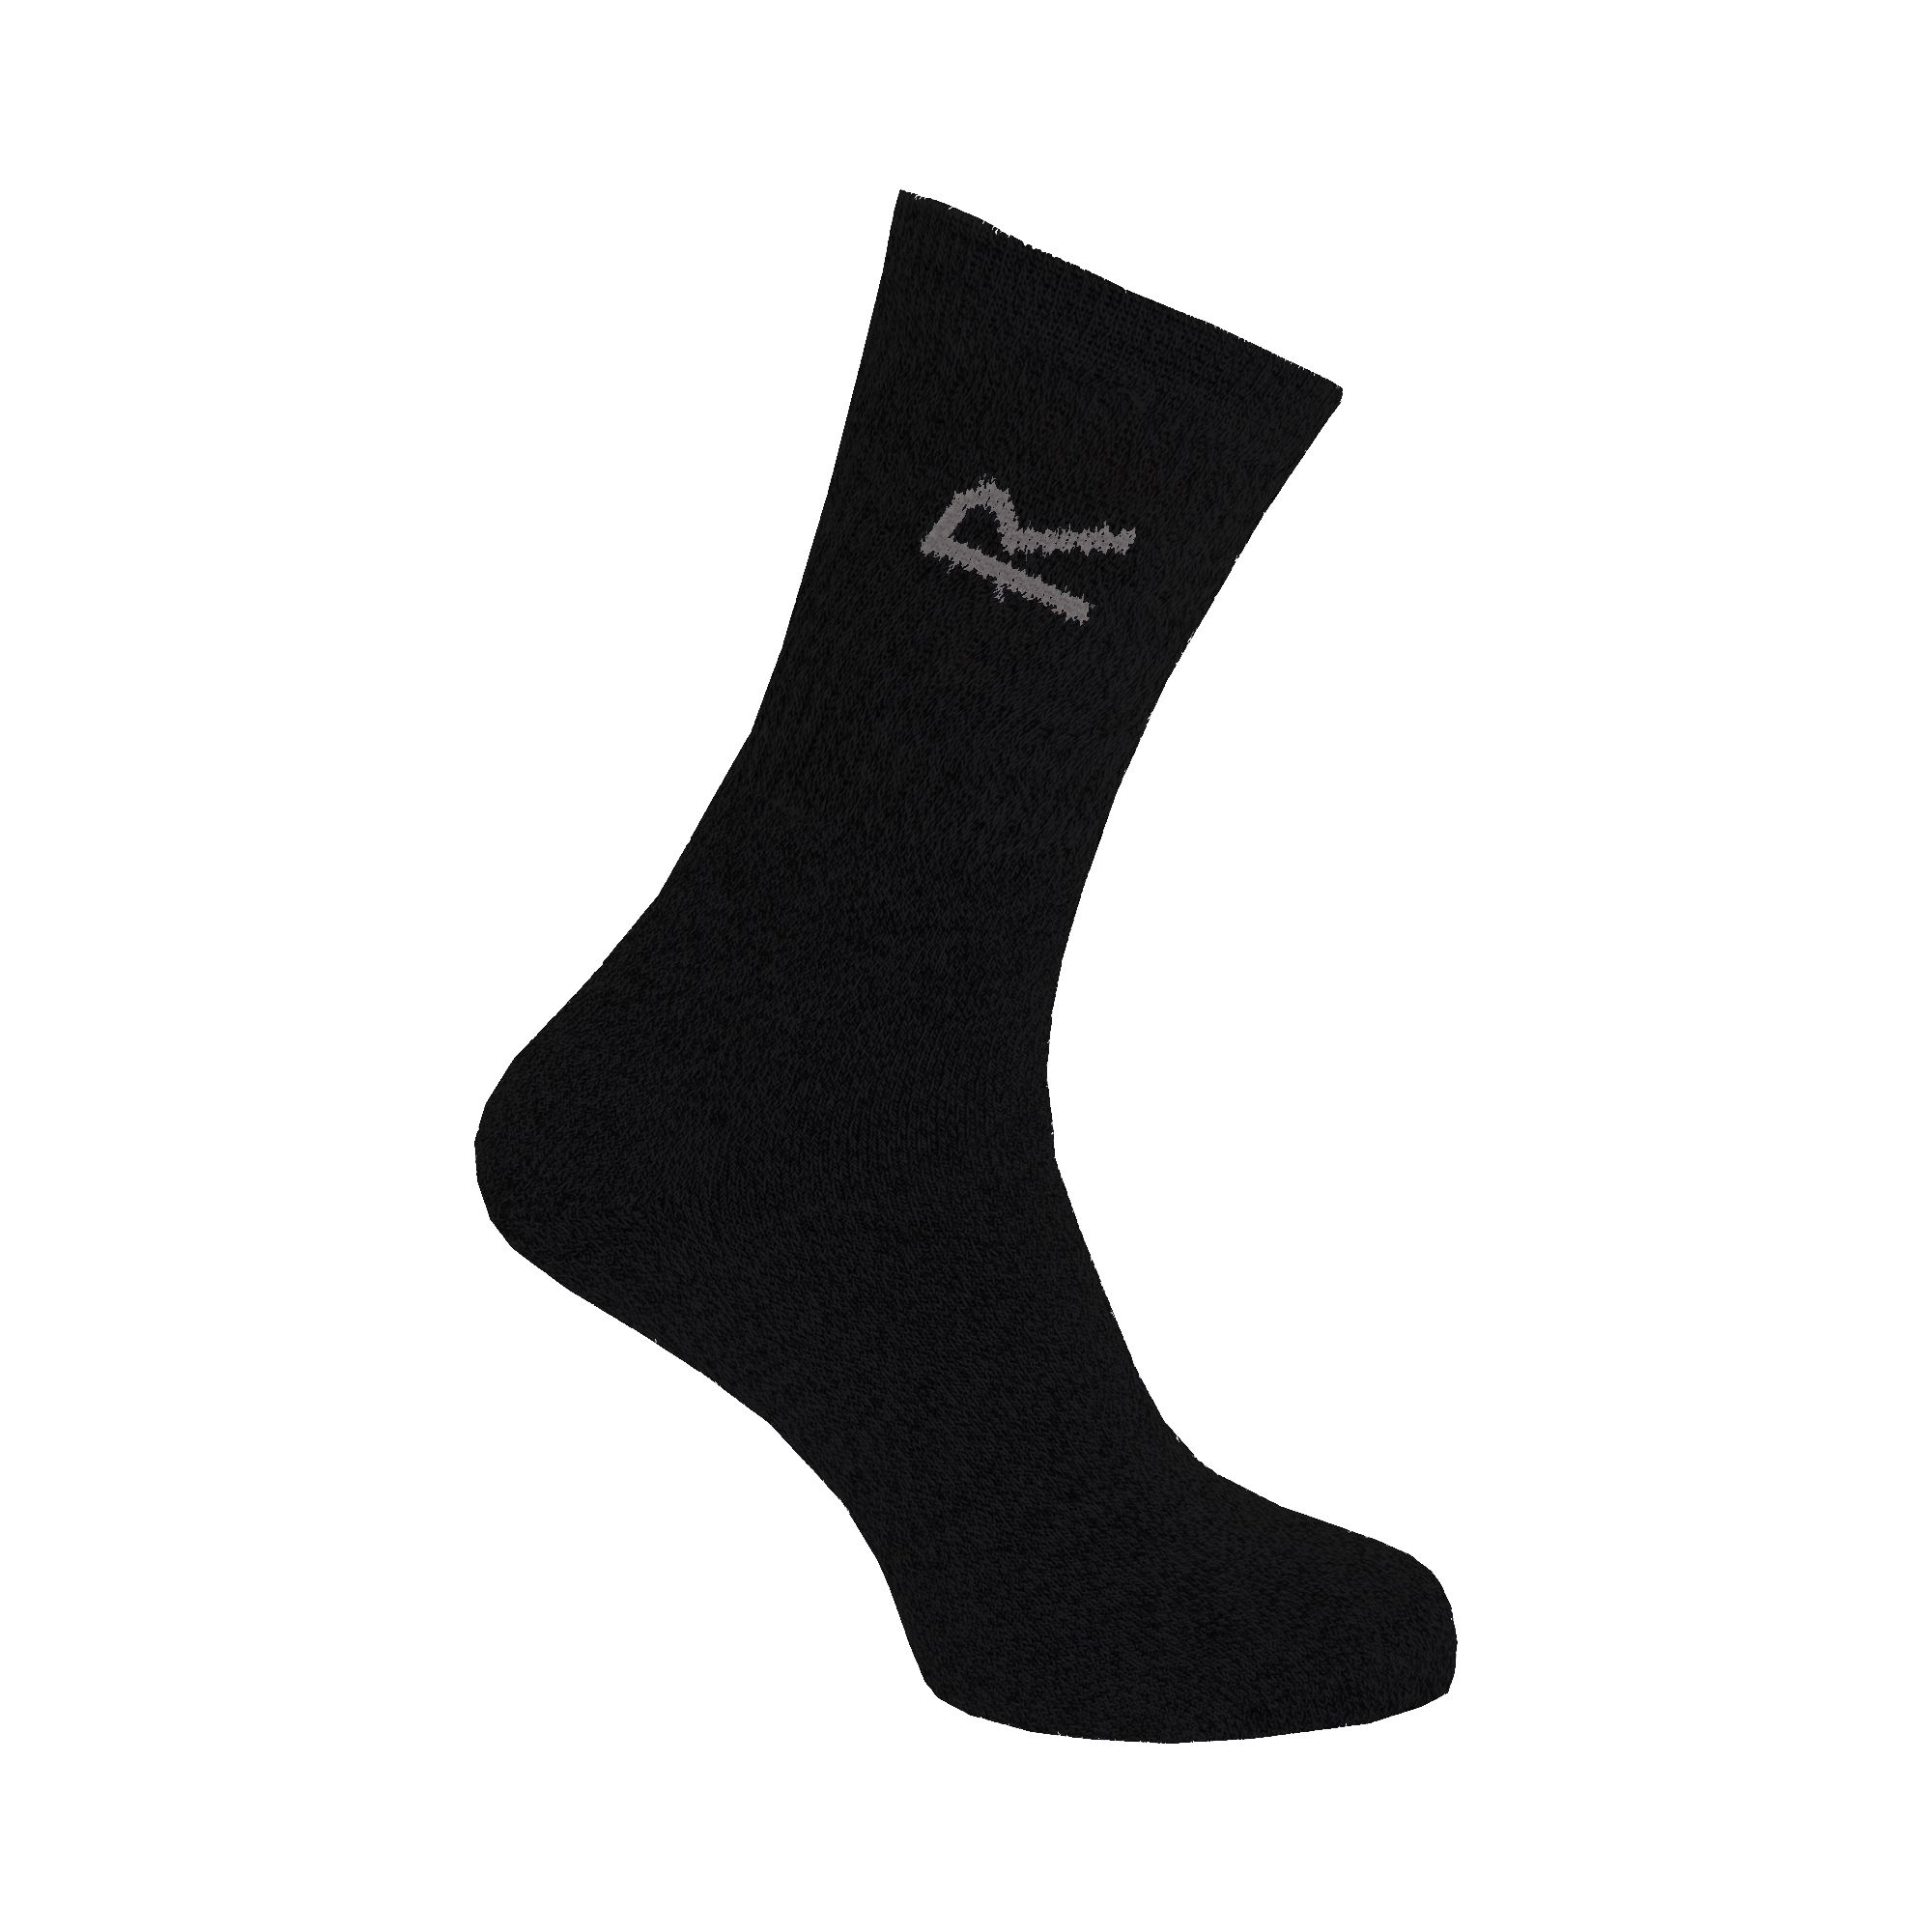 The mens Socks for everyday wear, knitted from a cotton blend yarn with a marl effect and contrast colour cuff. Three pairs per pack. 40% Cotton, 40% Polyester, 15% Polyamide, 5% Elastane.